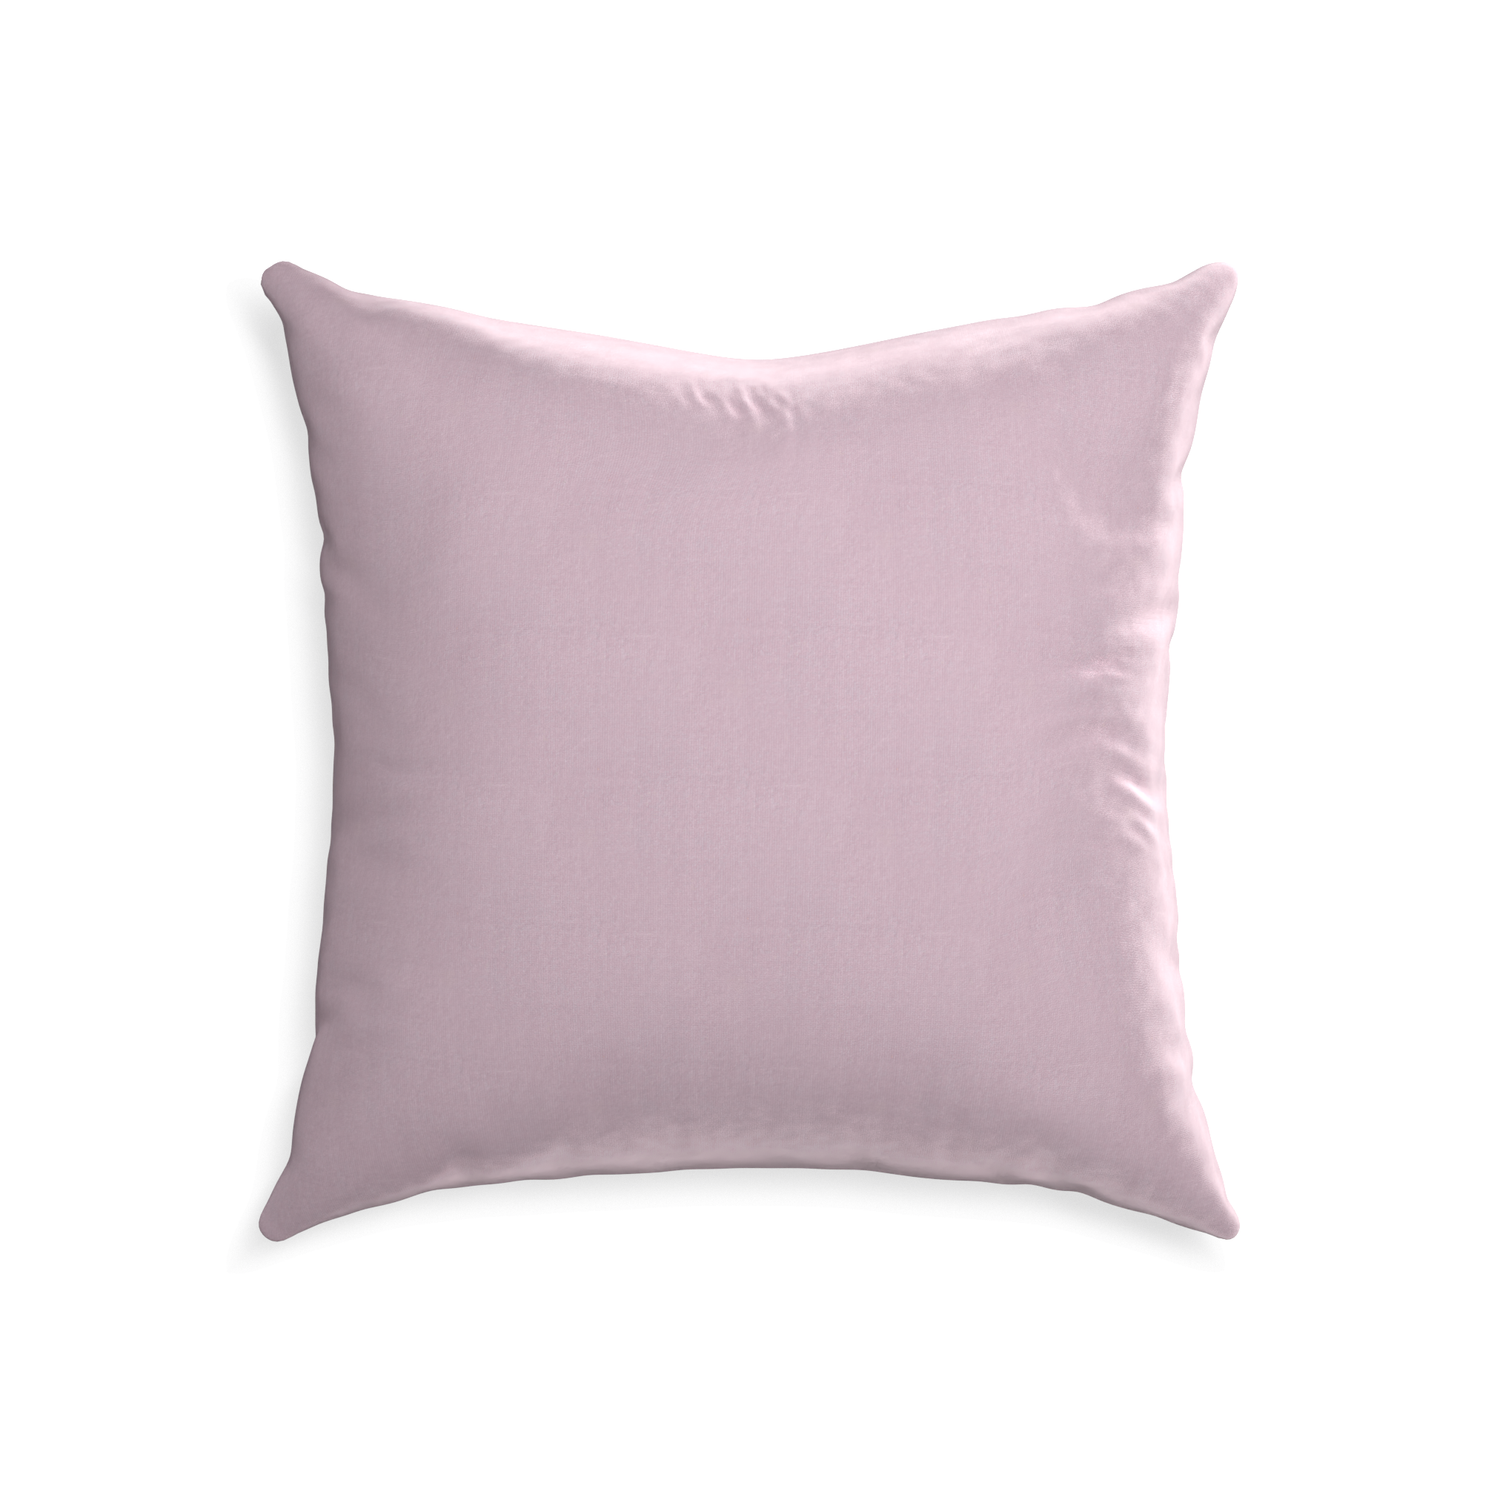 22-square lilac velvet custom lilacpillow with none on white background